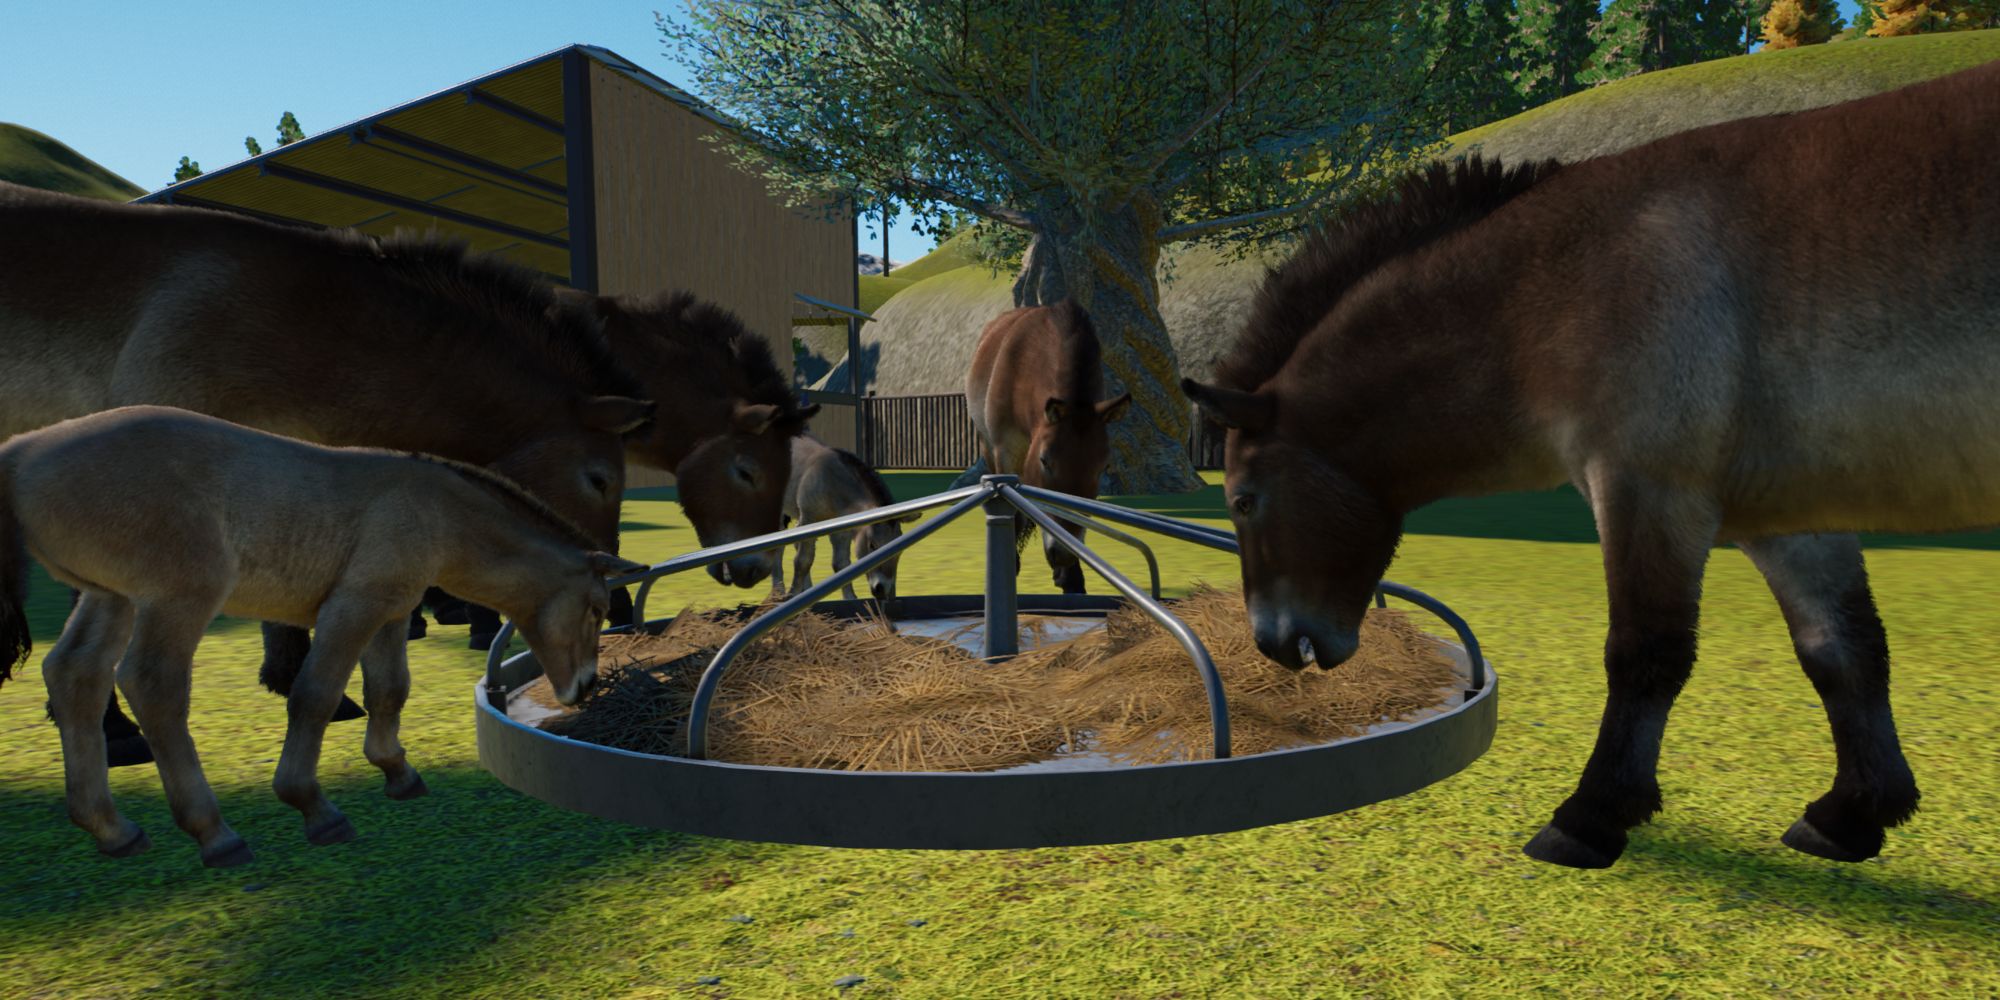 Planet Zoo Conservation Prewalski's horses eating